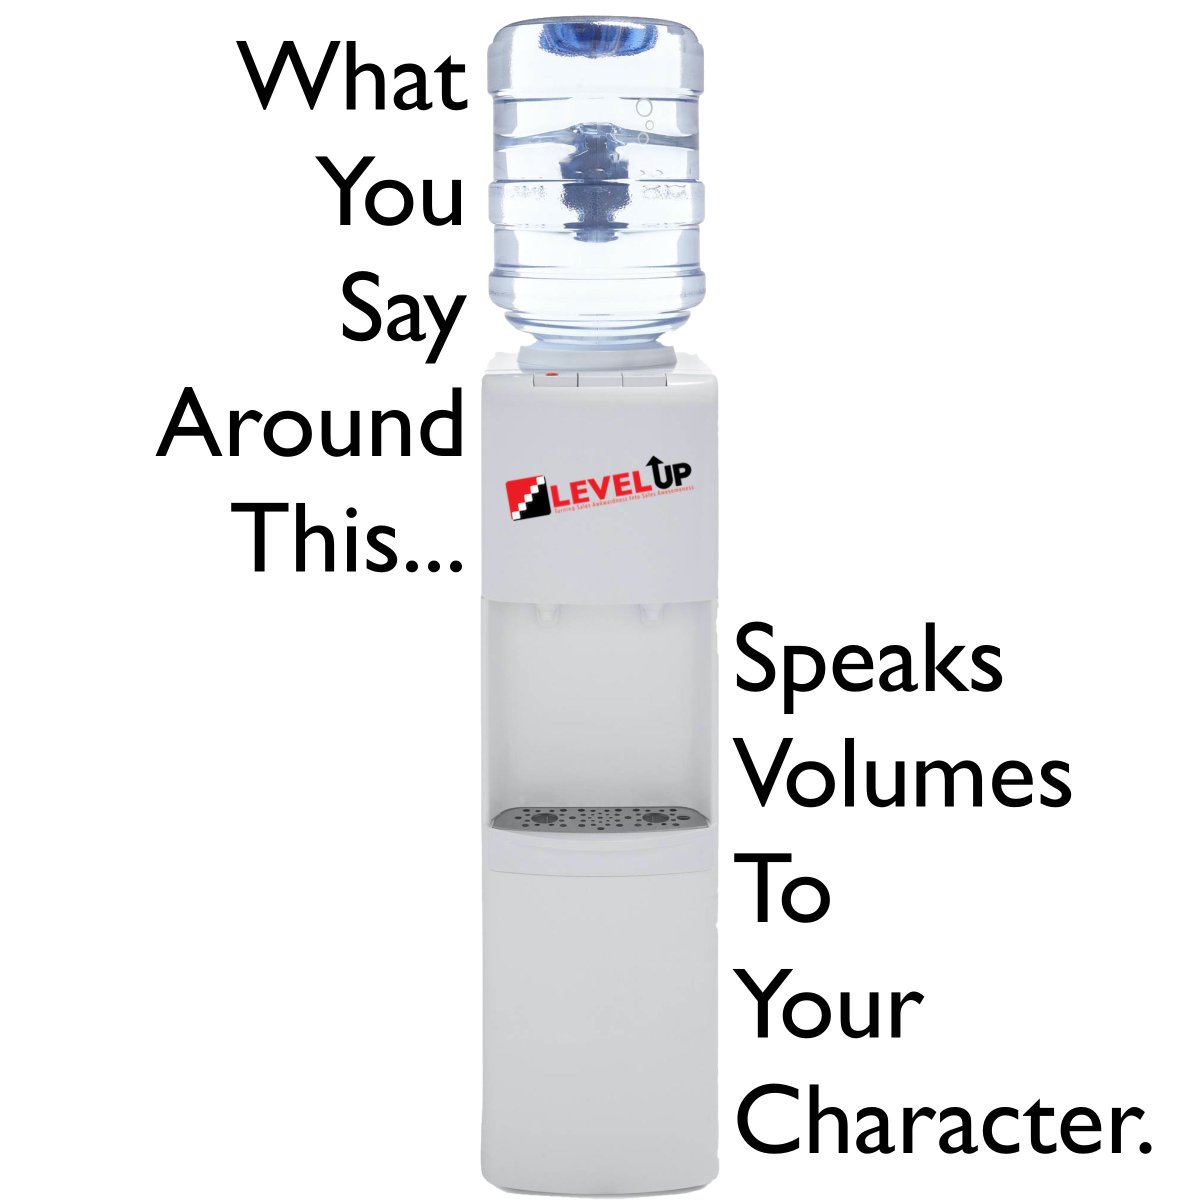 Here is the article I wrote this week on “Water Cooler Talk” and why I am so hard on myself. Do you agree, disagree? I look forward to hearing what you think!

#watercooler #character

linkedin.com/pulse/more-wat…

levelupyoursales.com